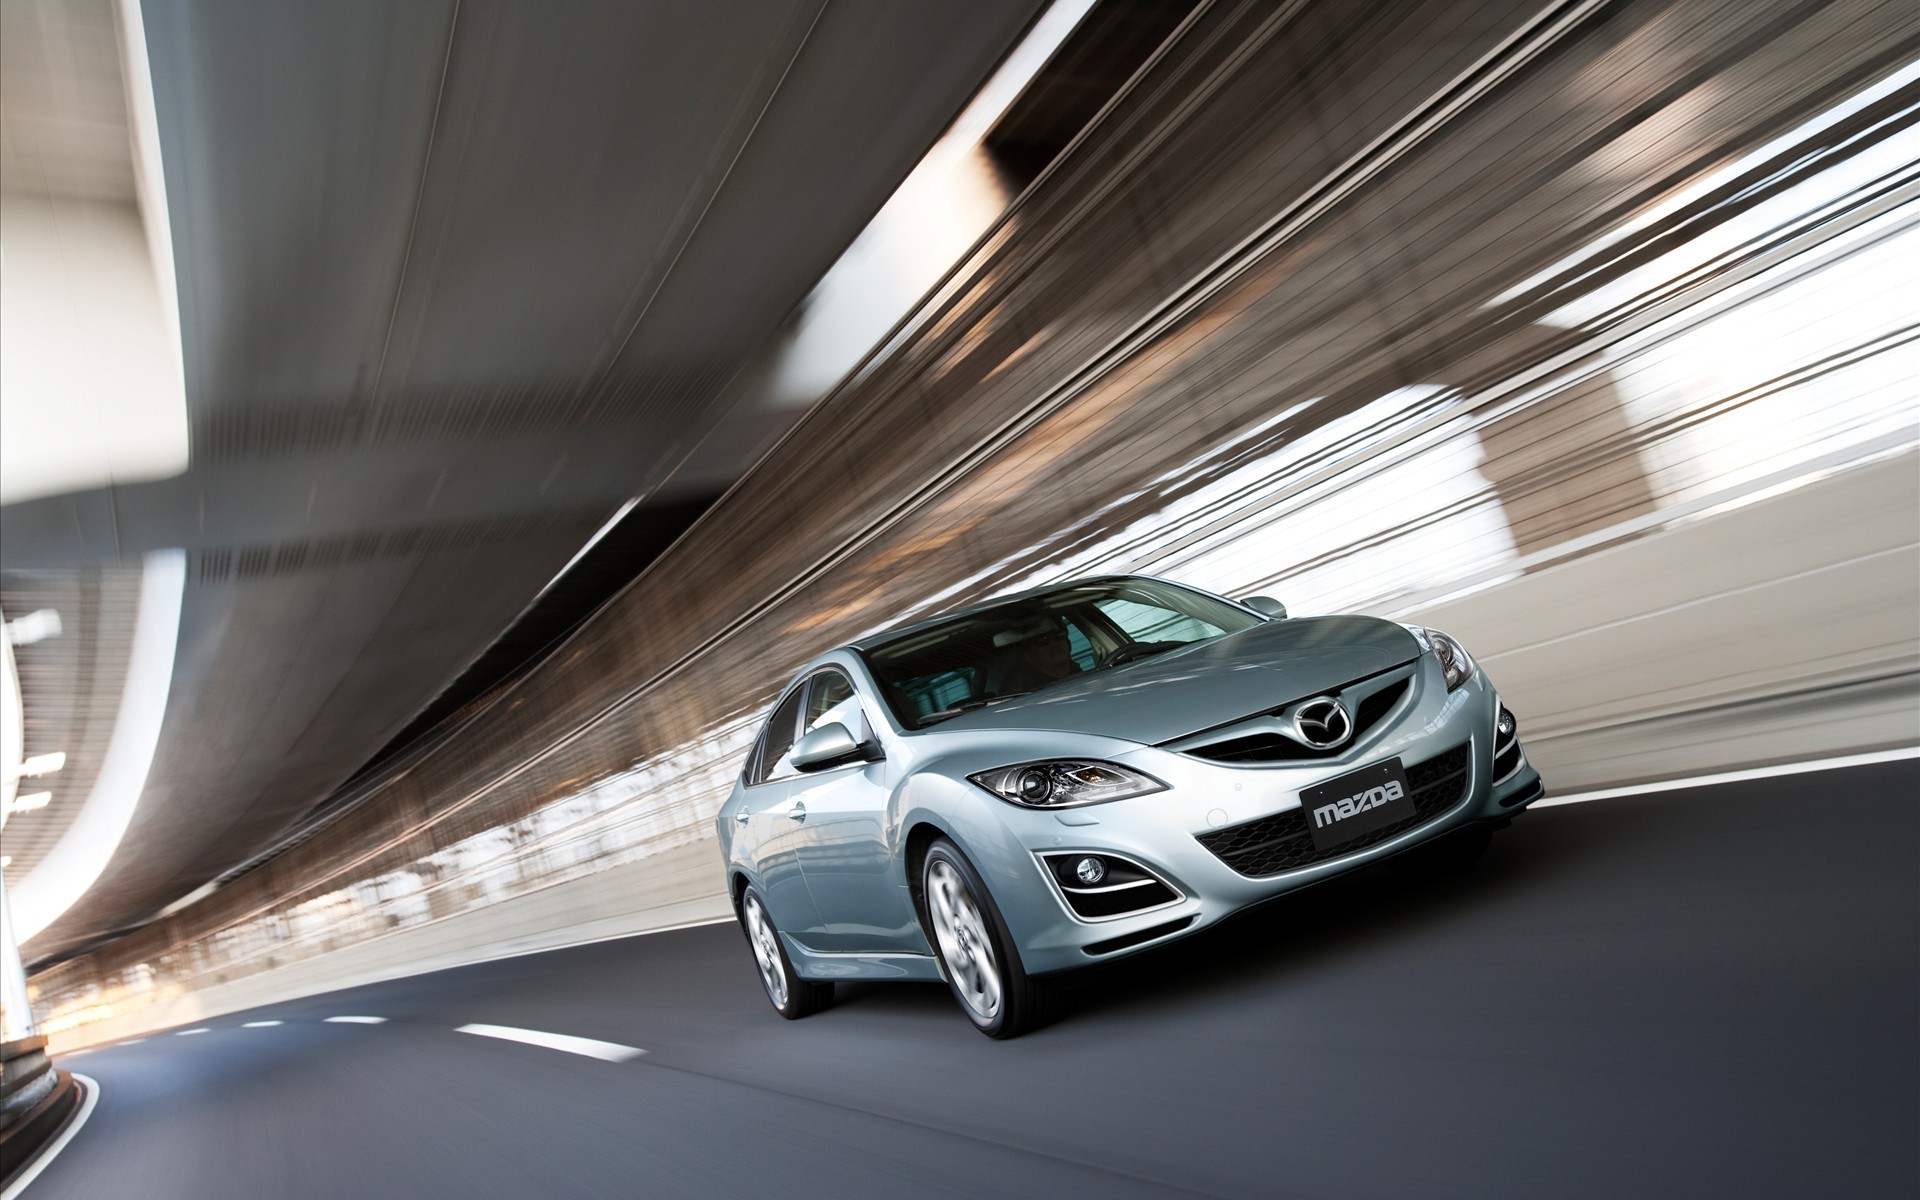 HD Mazda Wallpaper Full Pictures